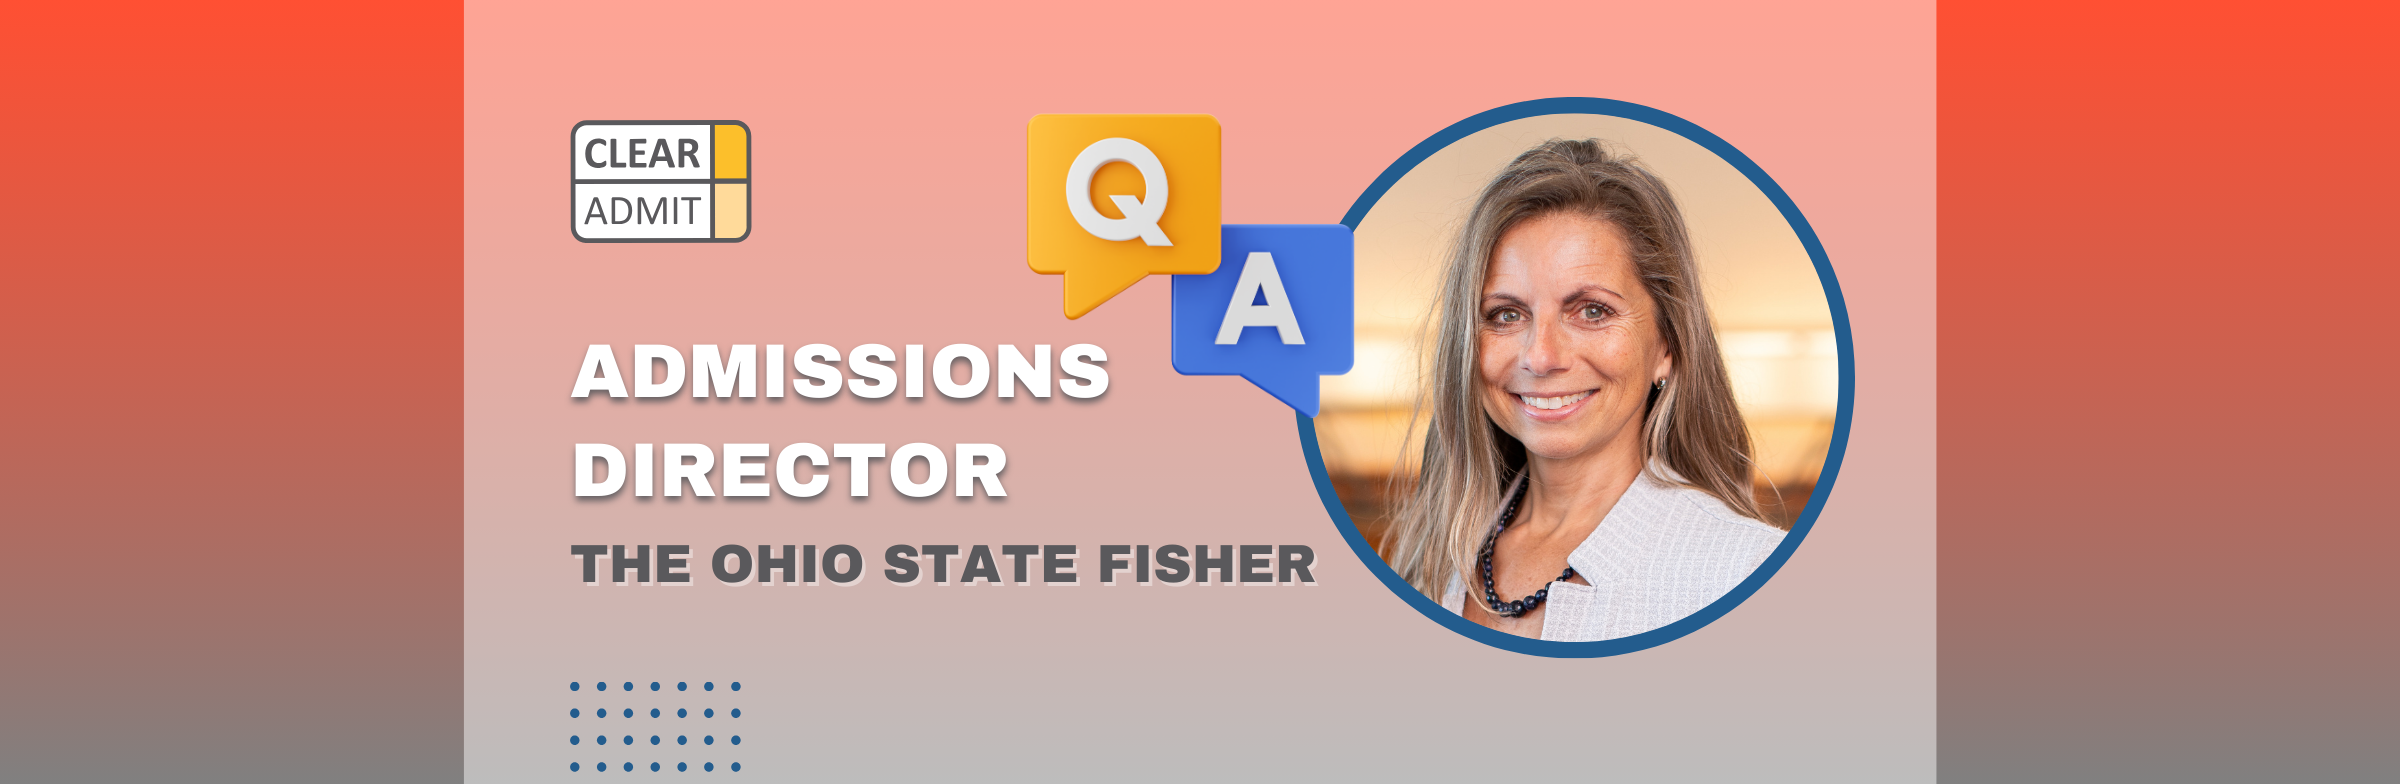 Image for Admissions Director Q&A: Hollie Hinton of The Ohio State Fisher College of Business